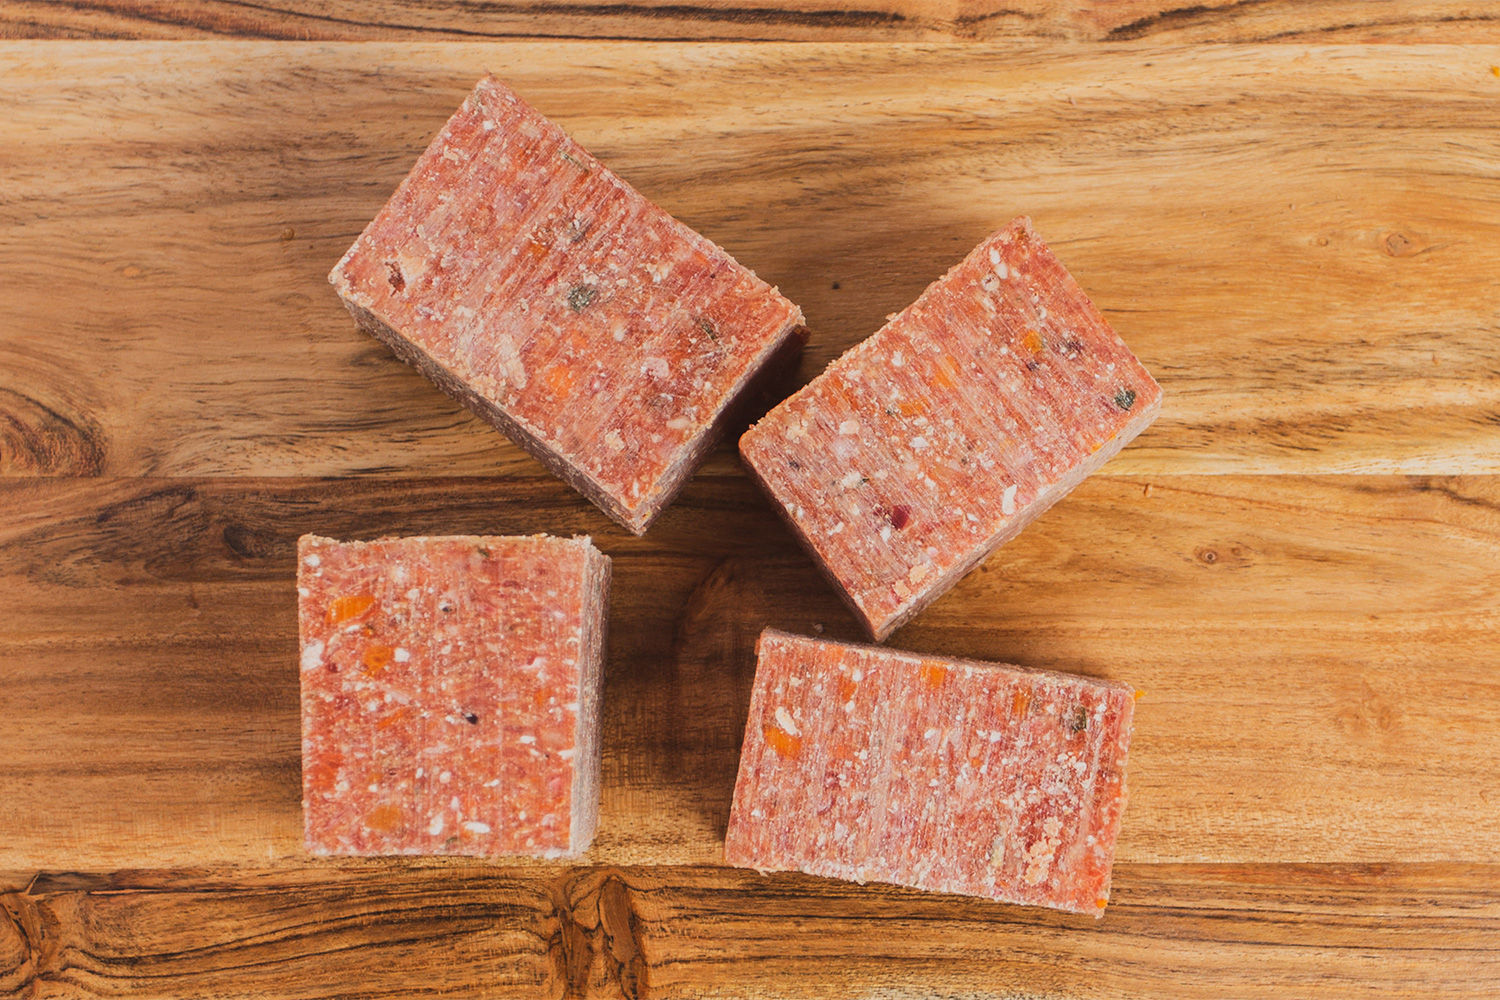 Savoury beef and vegetable cubes, a tasty and wholesome blend of flavours, providing a balanced meal for your canine companion